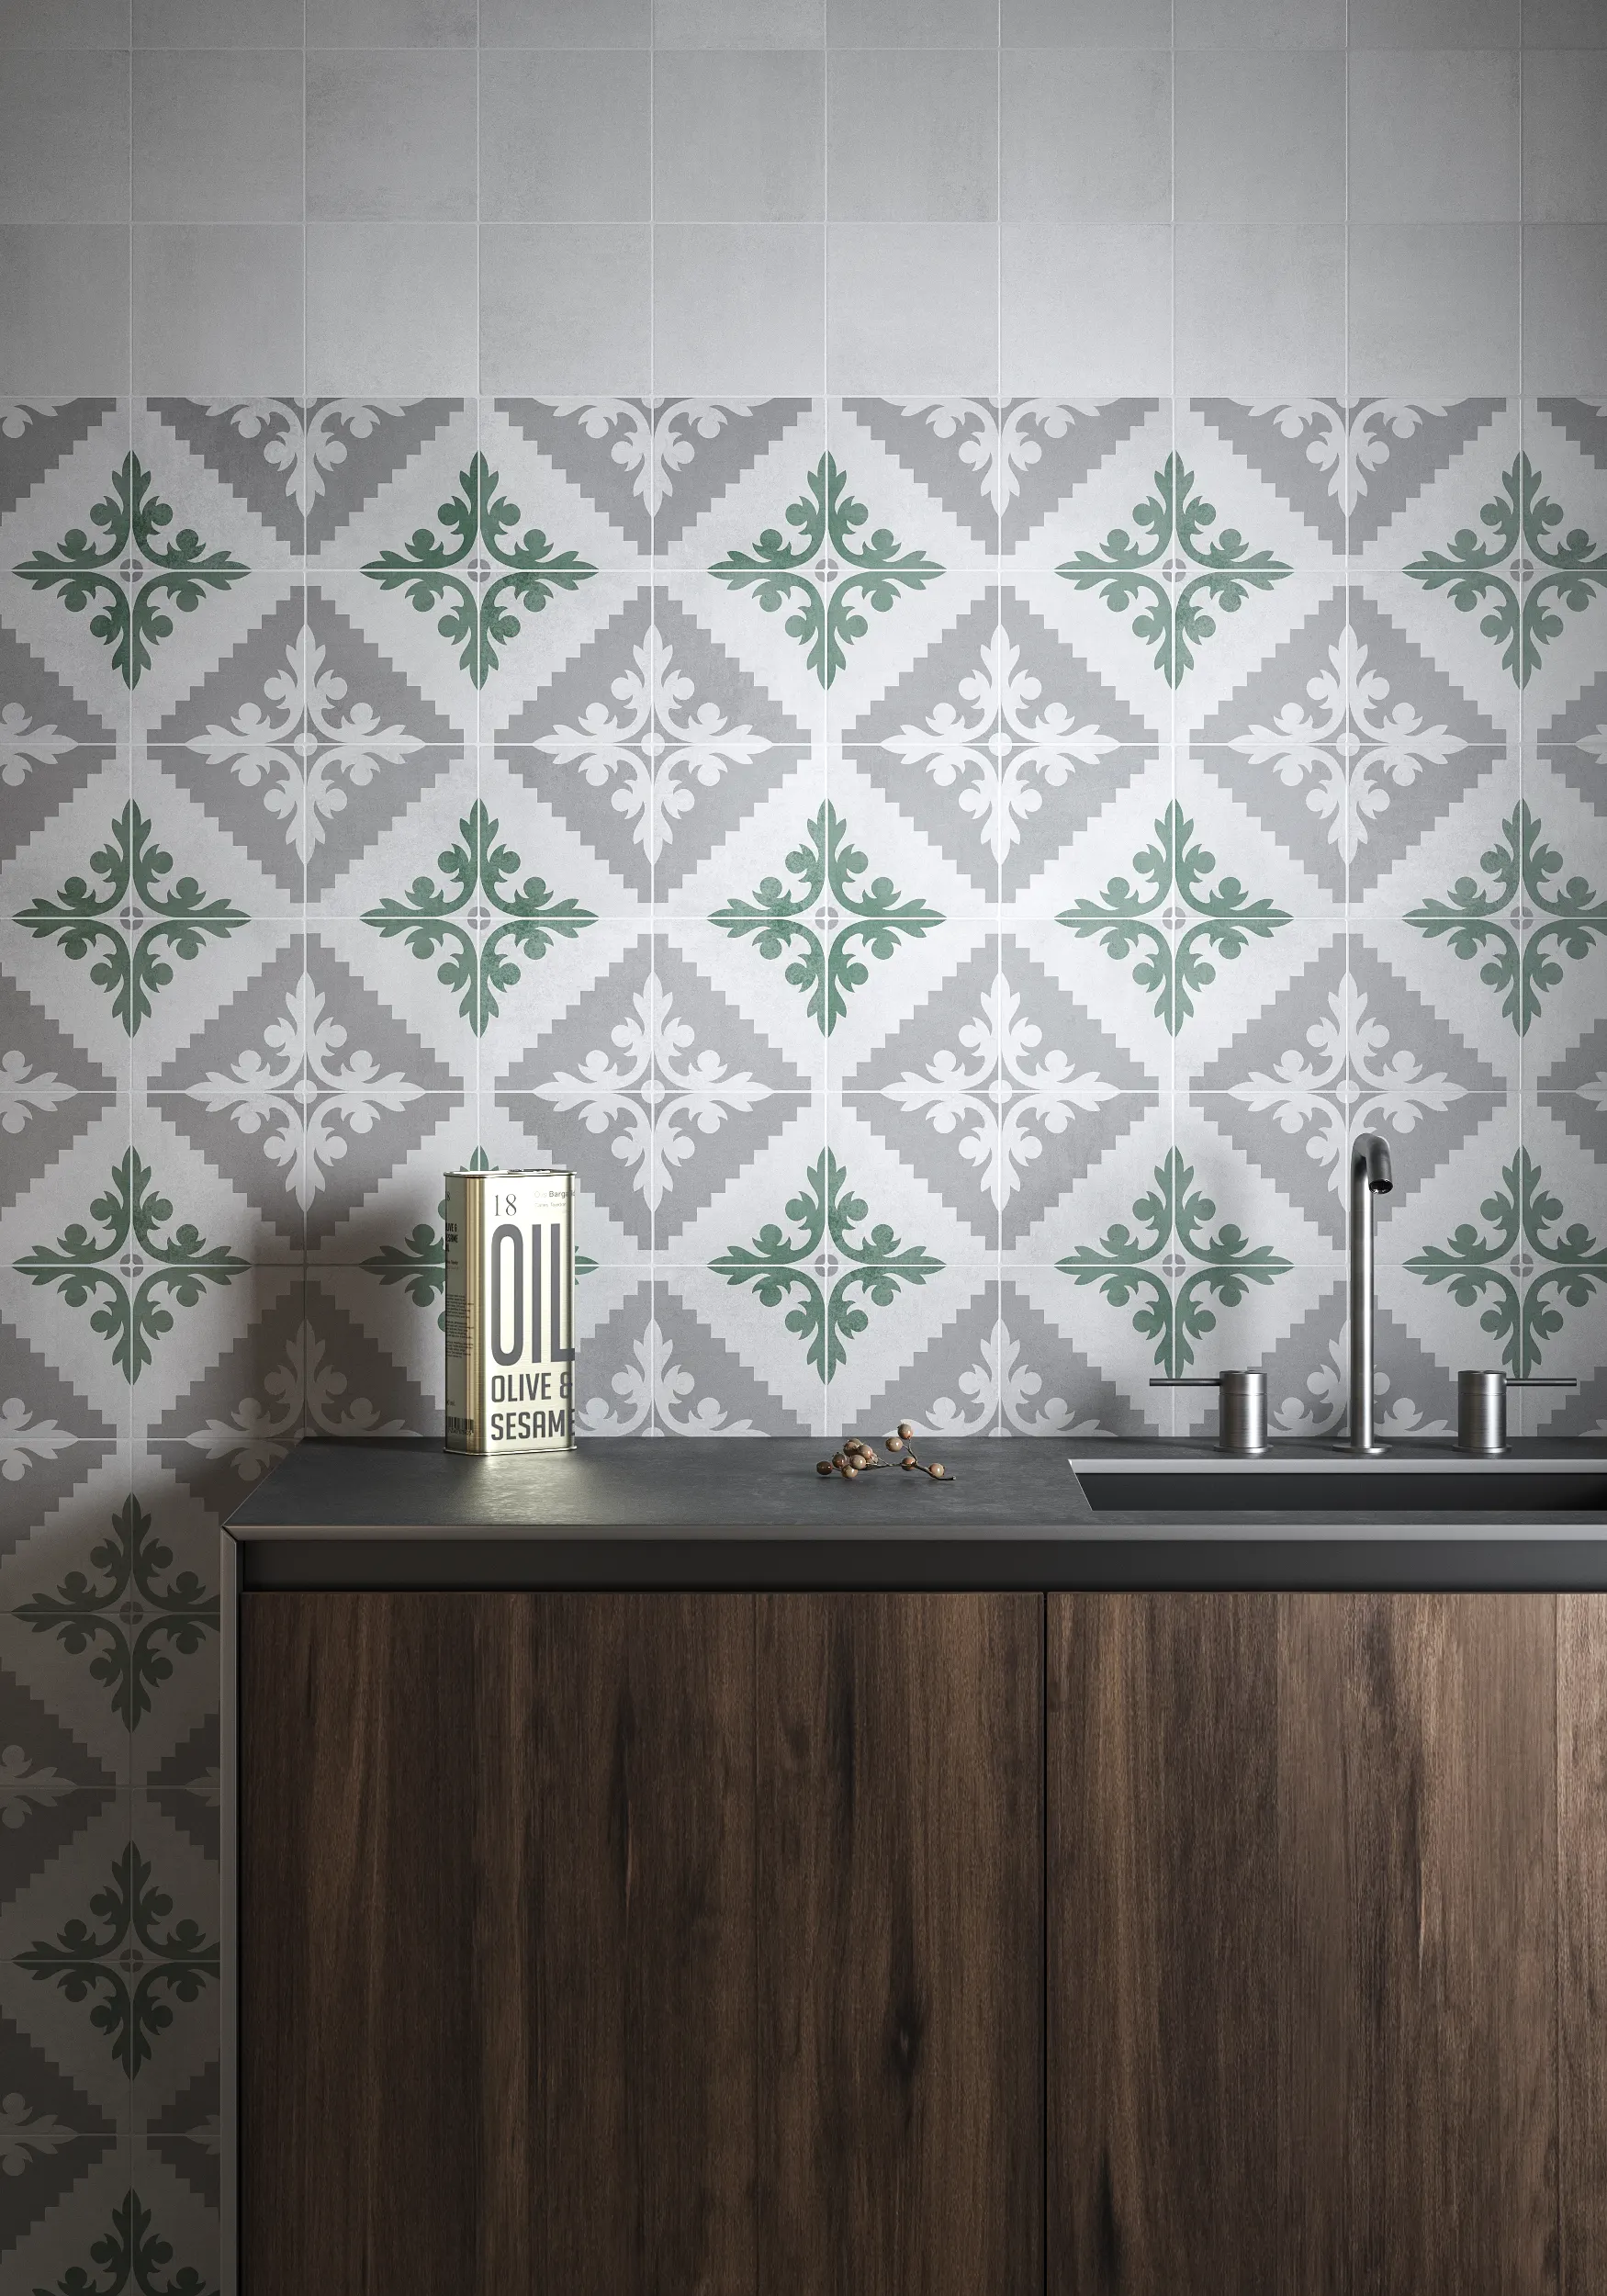 Kitchen wall with green decorative tiles in 15x15 cm